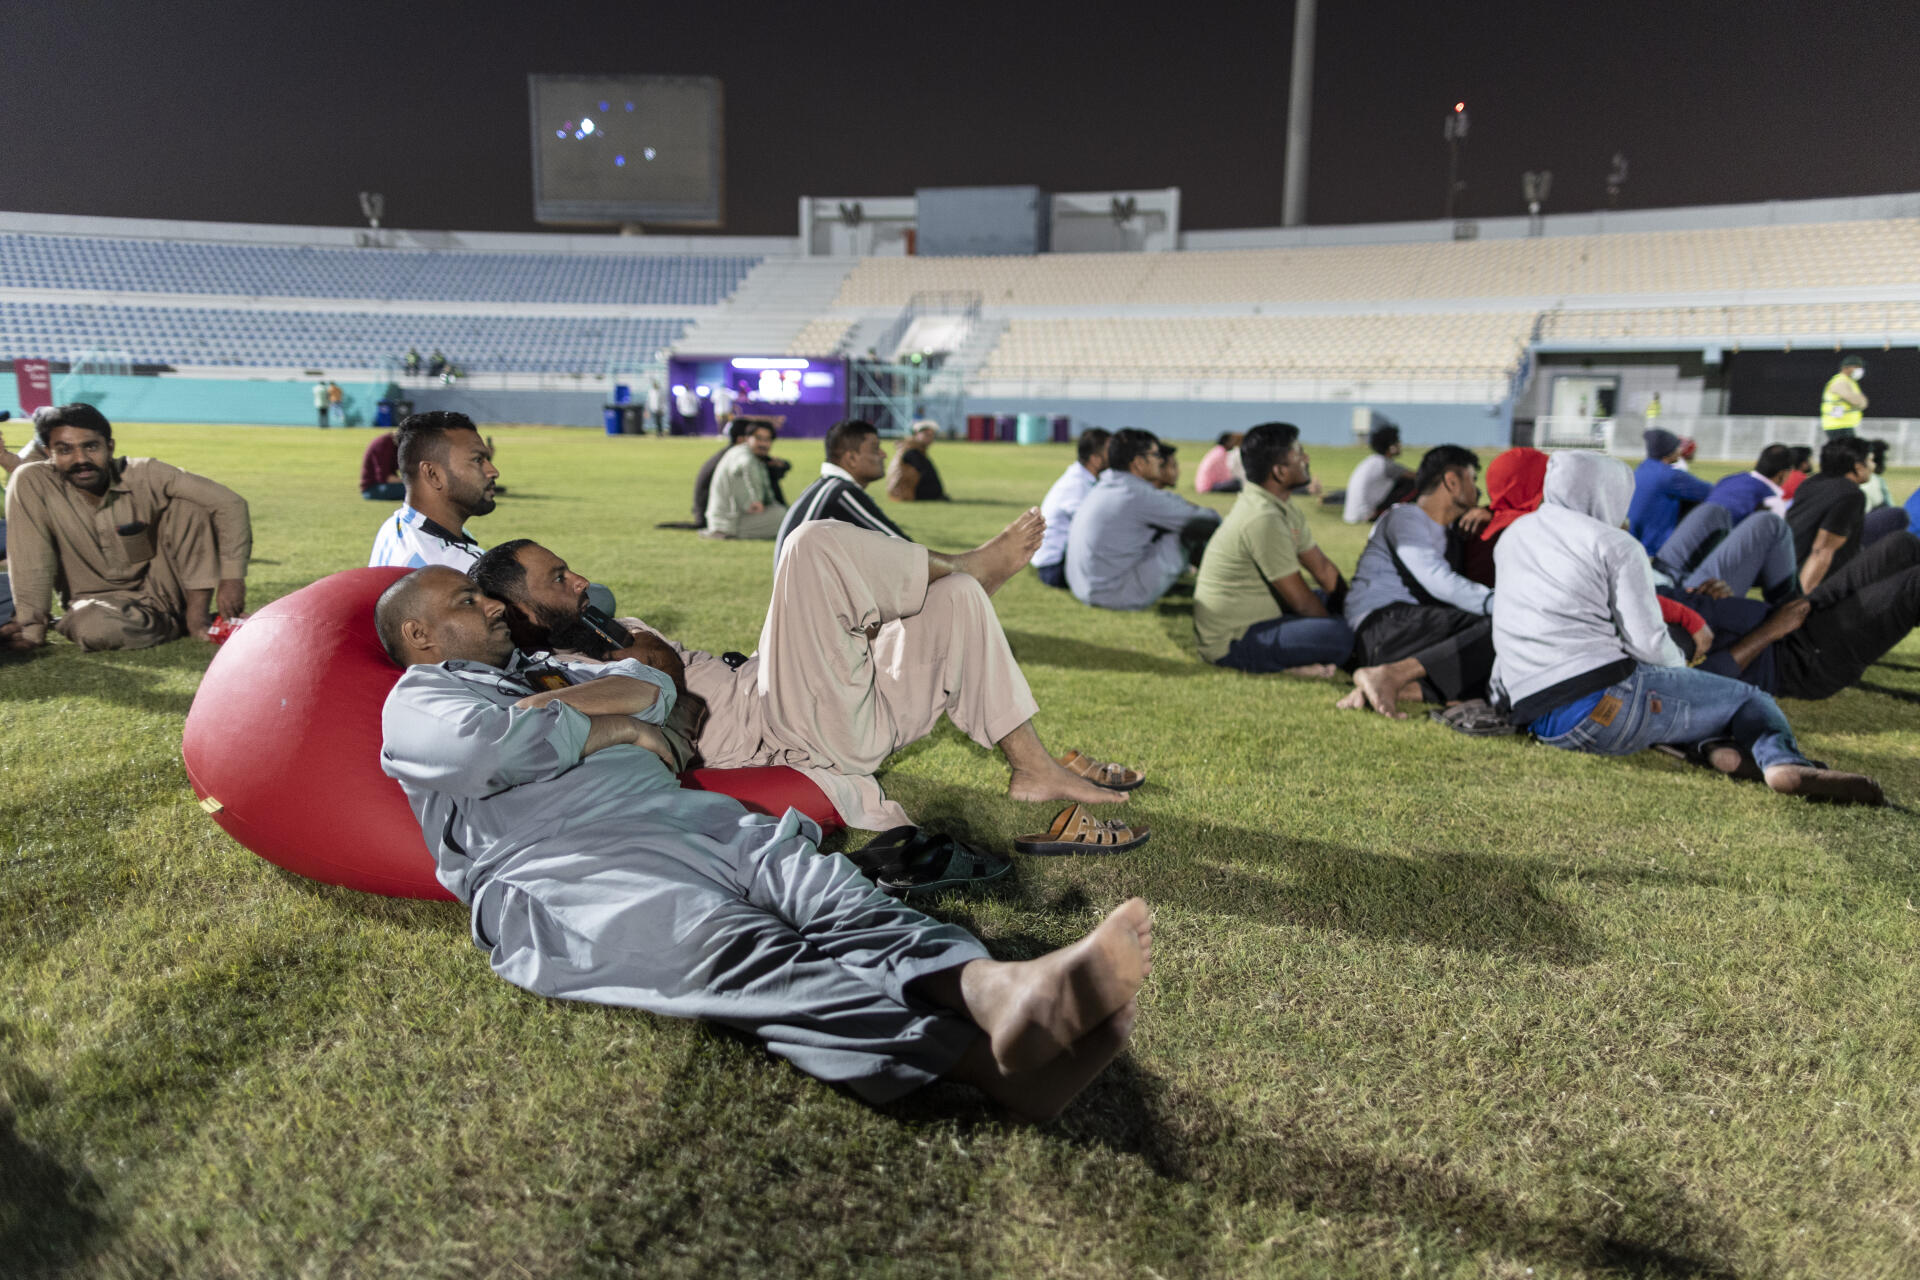 Inside the fan zone, during the Poland-Mexico match, in Doha, Qatar, on November 22, 2022.